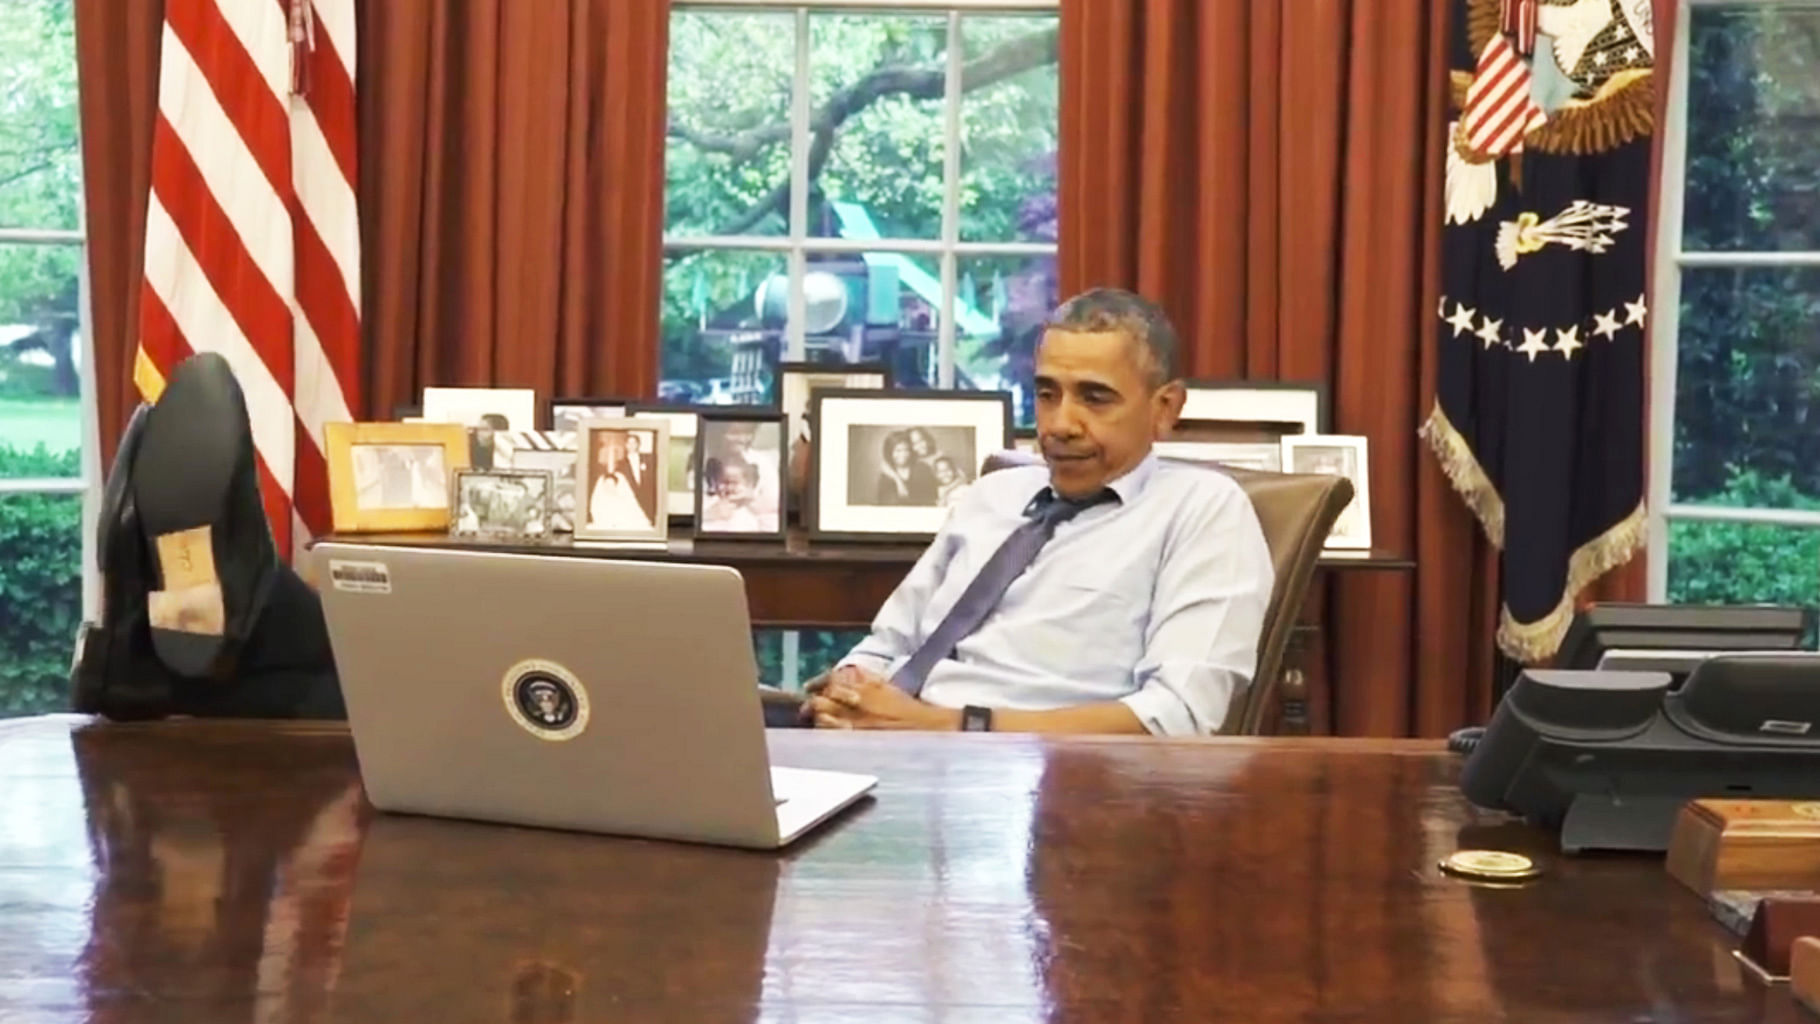 US President Barack Obama starring in his own spoof video. (Photo Courtesy: video screengrab)